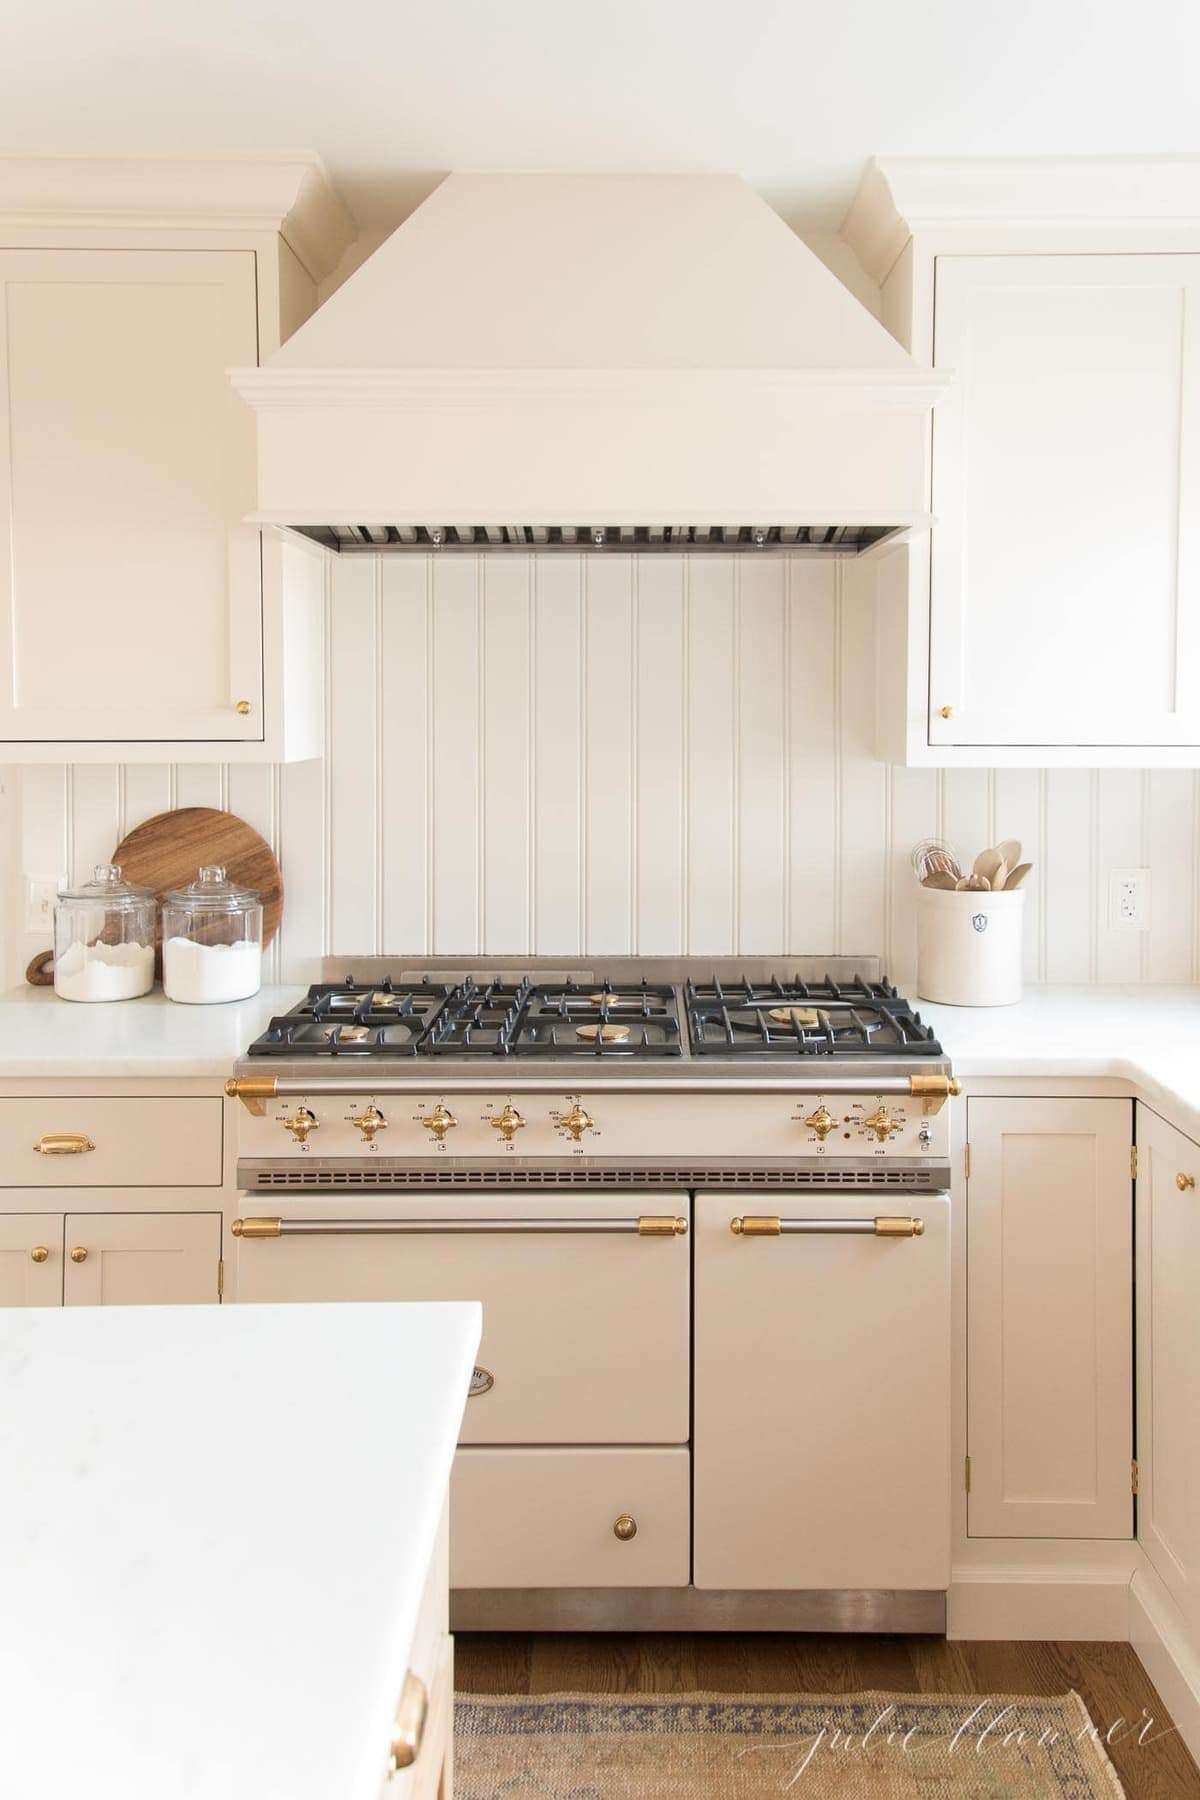 A cream kitchen with a lacanche range as the focal point